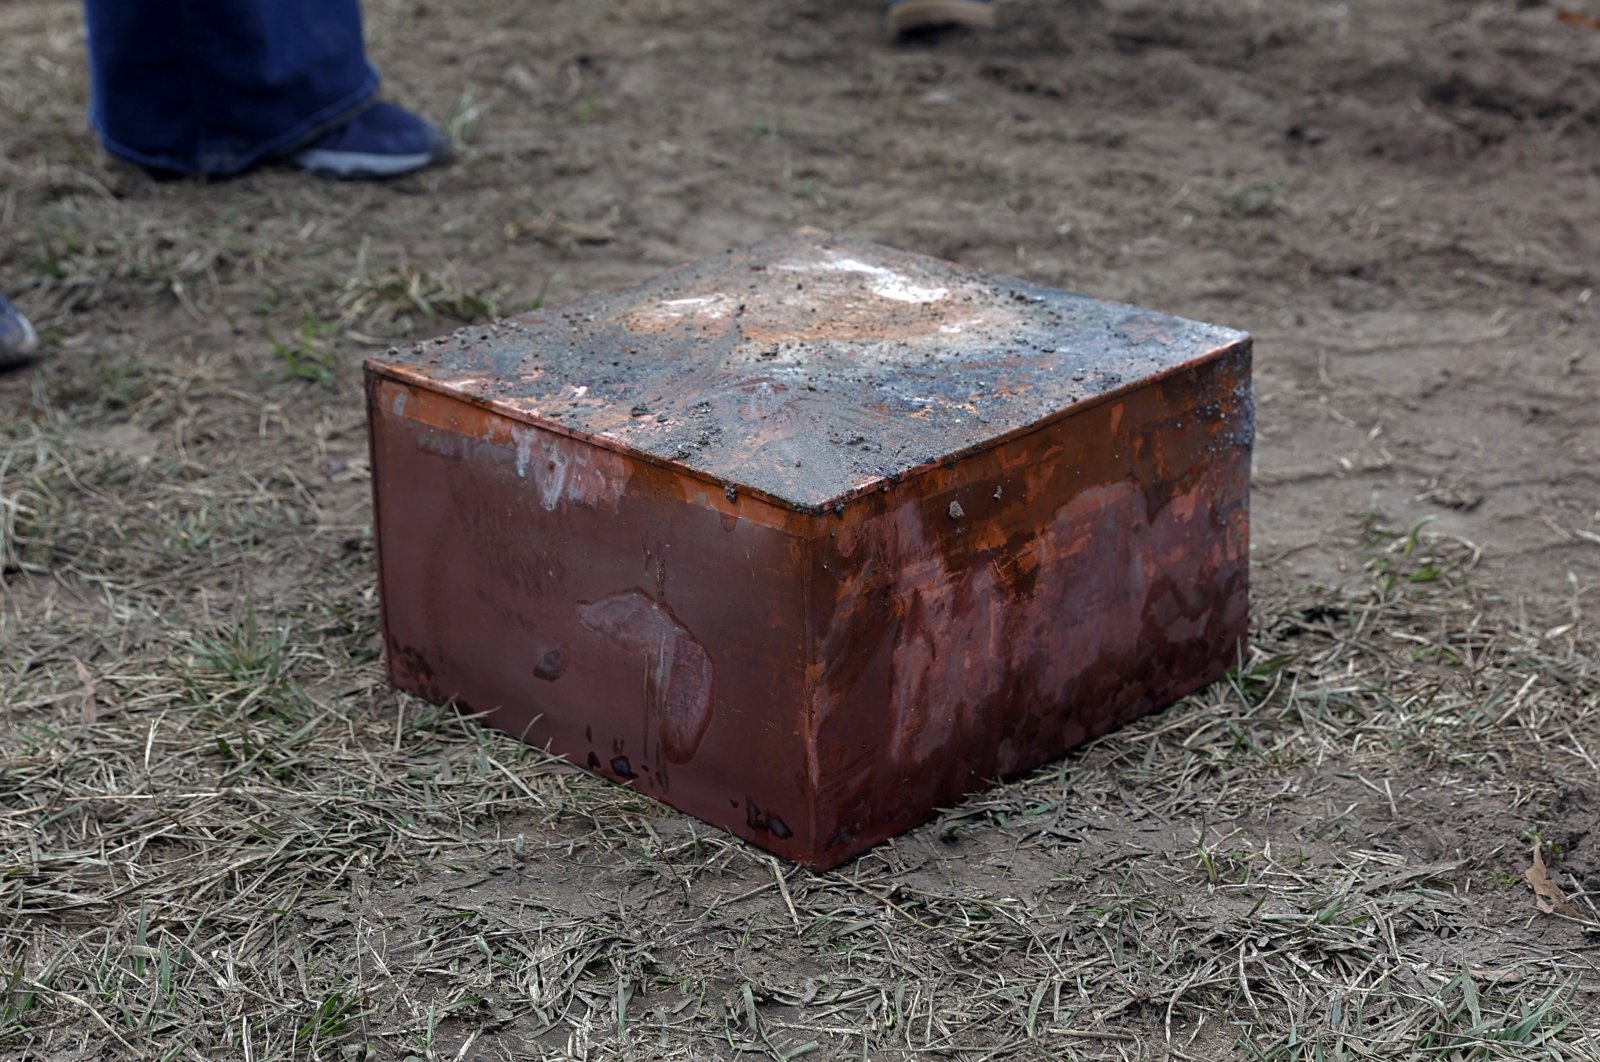 Workers recover a box believed to be the 1887 time capsule that was put under Confederate Gen. Robert E. Lee&#039;s statue pedestal in Richmond, Virginia, U.S., Dec. 27, 2021. (AP Photo)